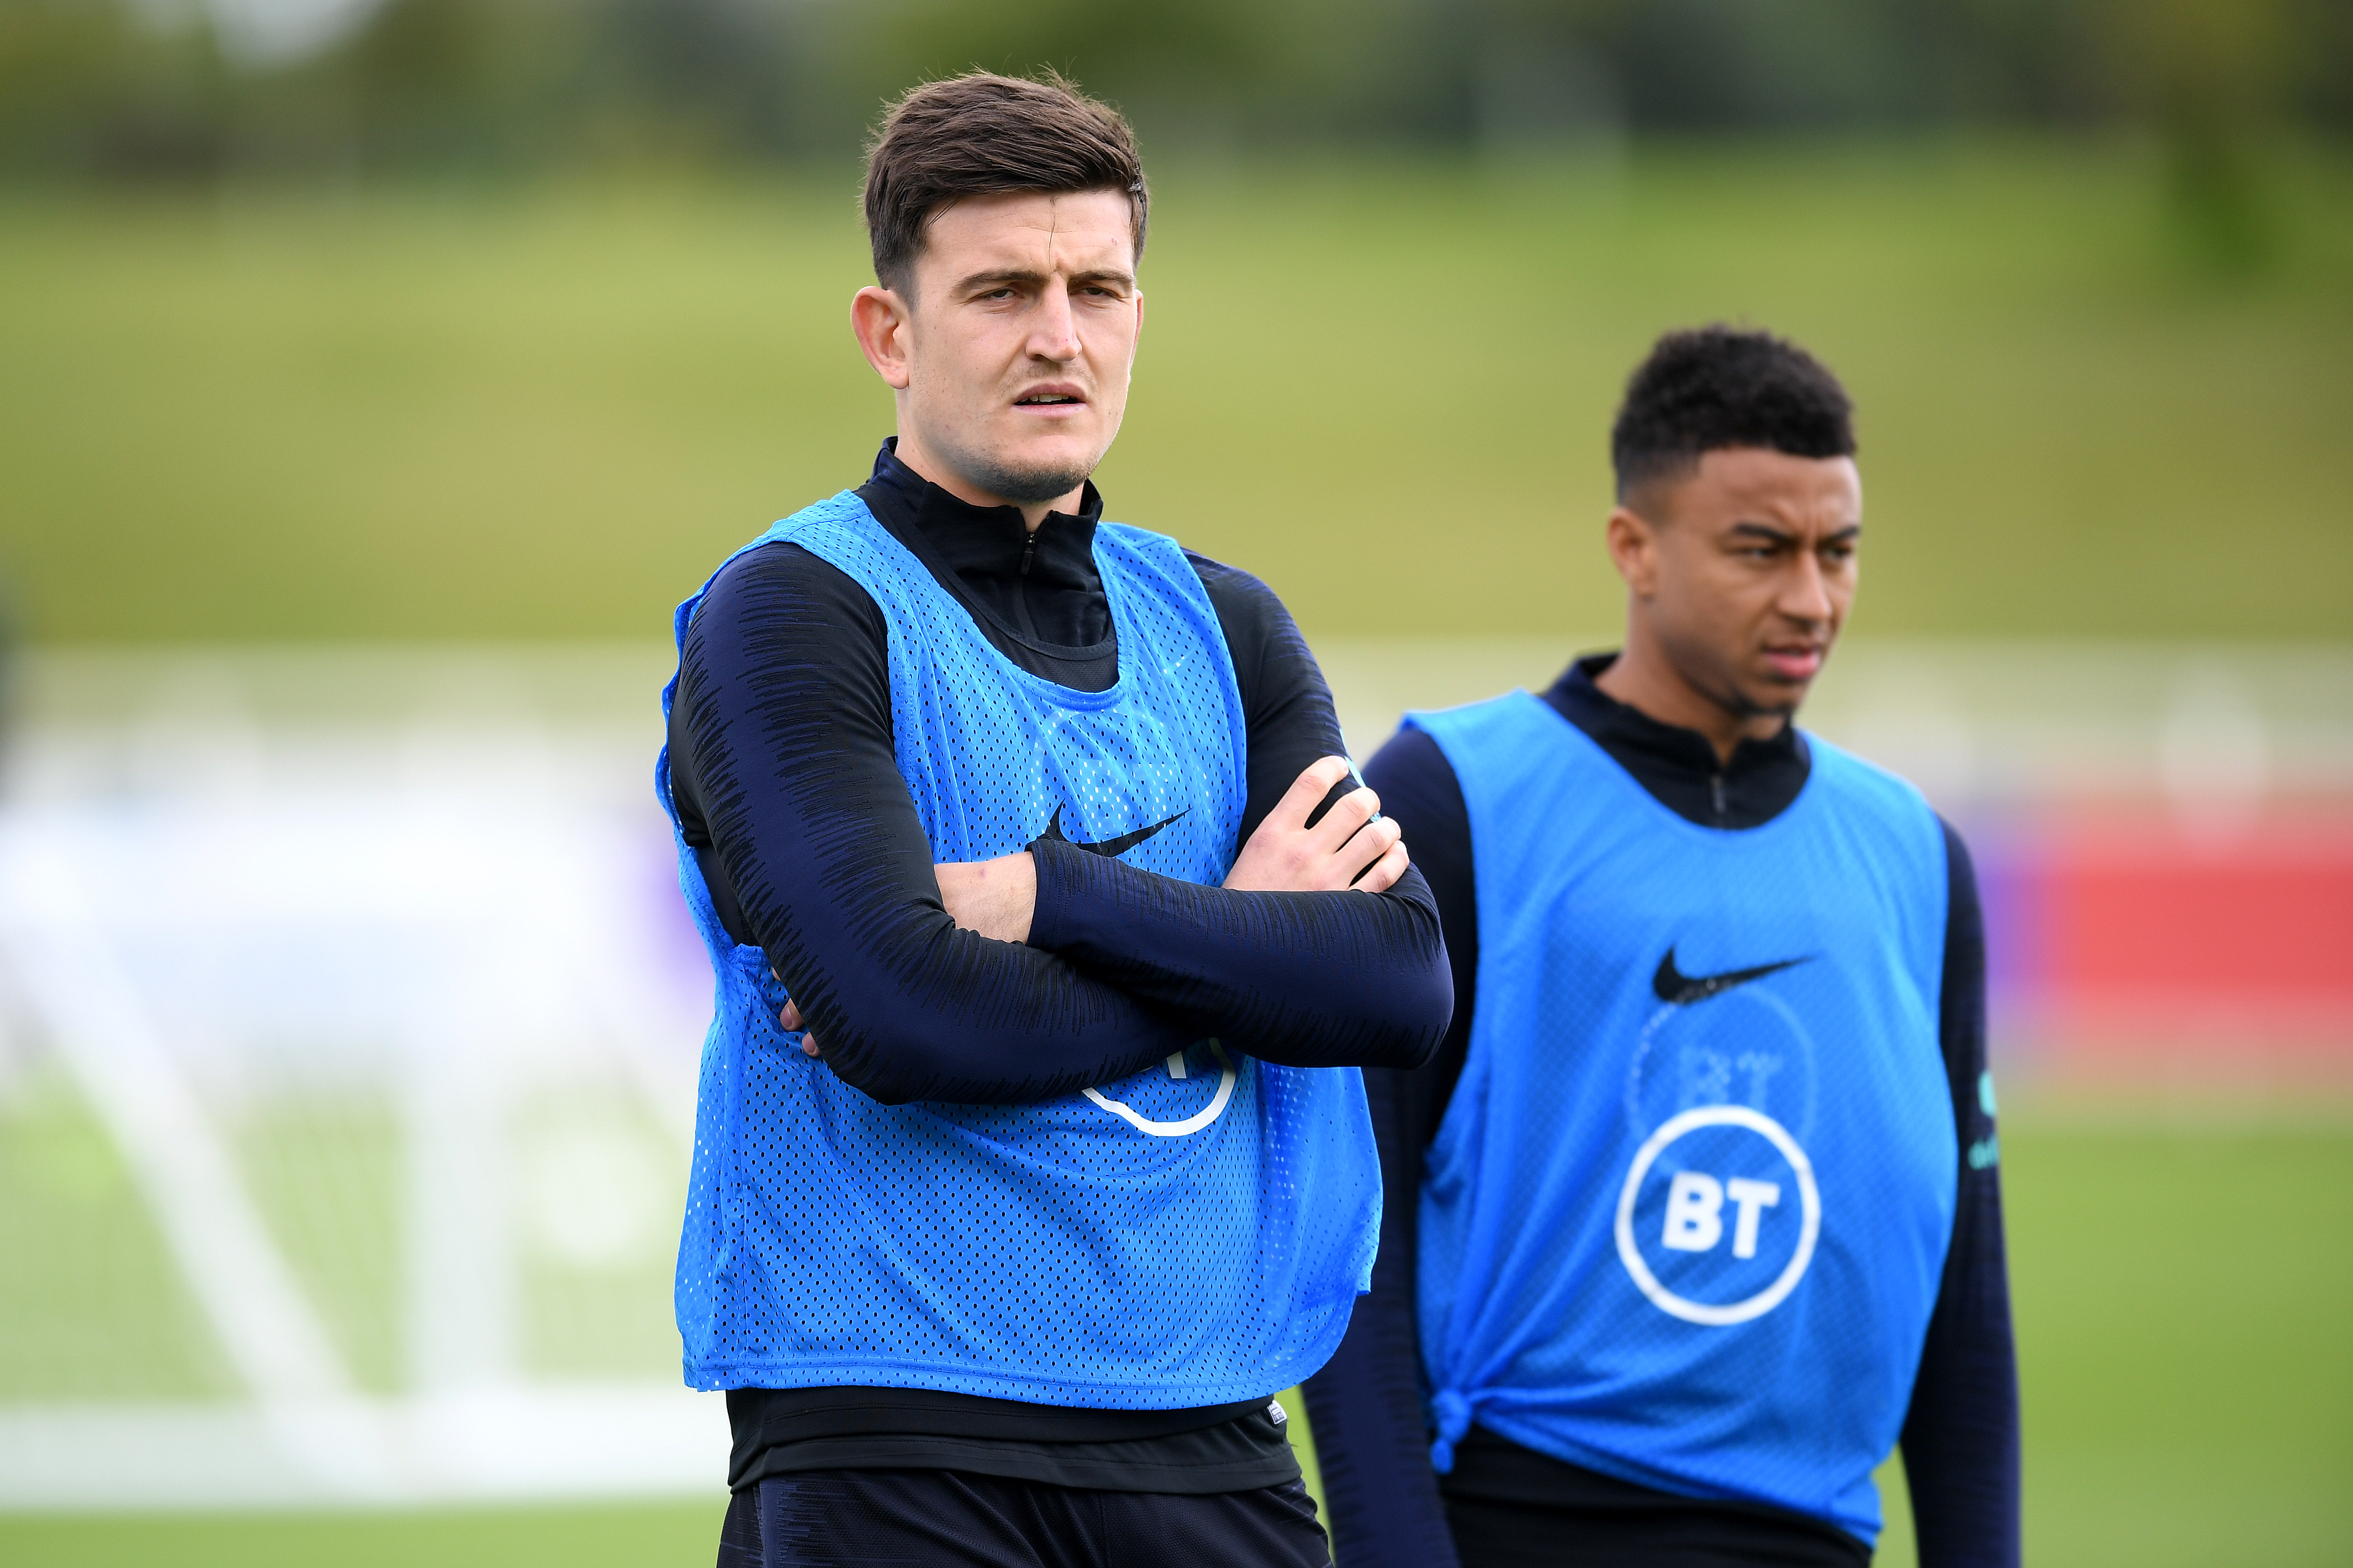 BURTON-UPON-TRENT, ENGLAND - SEPTEMBER 02: Harry Maguire and Jesse Lingard during an England Media Access day at St Georges Park on September 02, 2019 in Burton-upon-Trent, England. (Photo by Michael Regan/Getty Images)